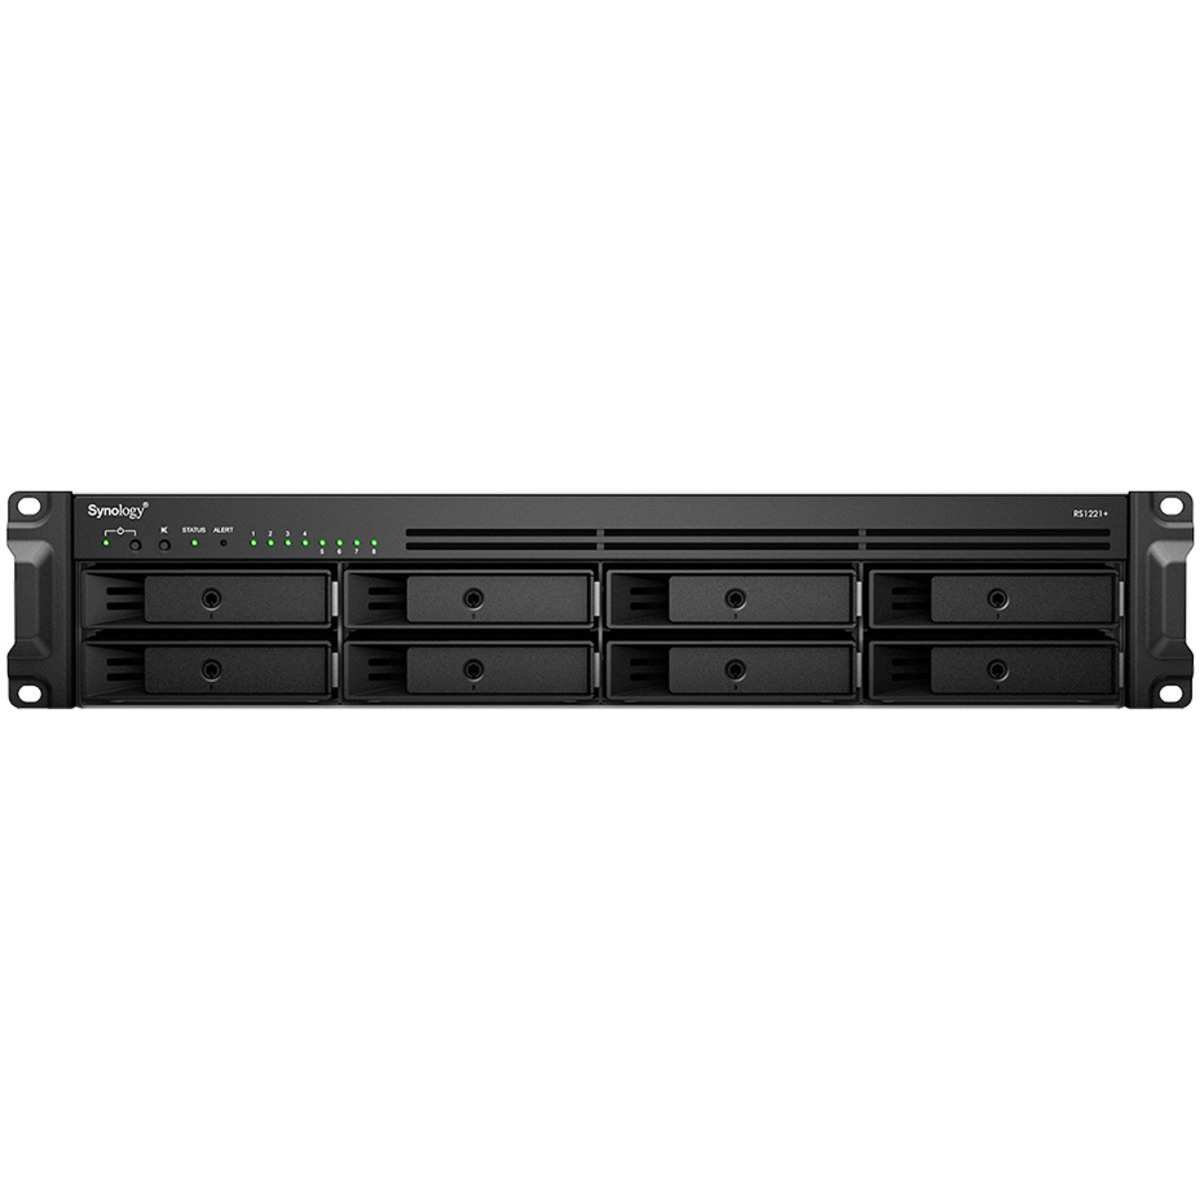 buy $2859 Synology RackStation RS1221RP+ 8tb RackMount NAS - Network Attached Storage Device 8x1000gb Samsung 870 QVO MZ-77Q1T0 2.5 SATA 6Gb/s SSD CONSUMER Class Drives Installed - Burn-In Tested - nas headquarters buy network attached storage server device das new raid-5 free shipping usa RackStation RS1221RP+